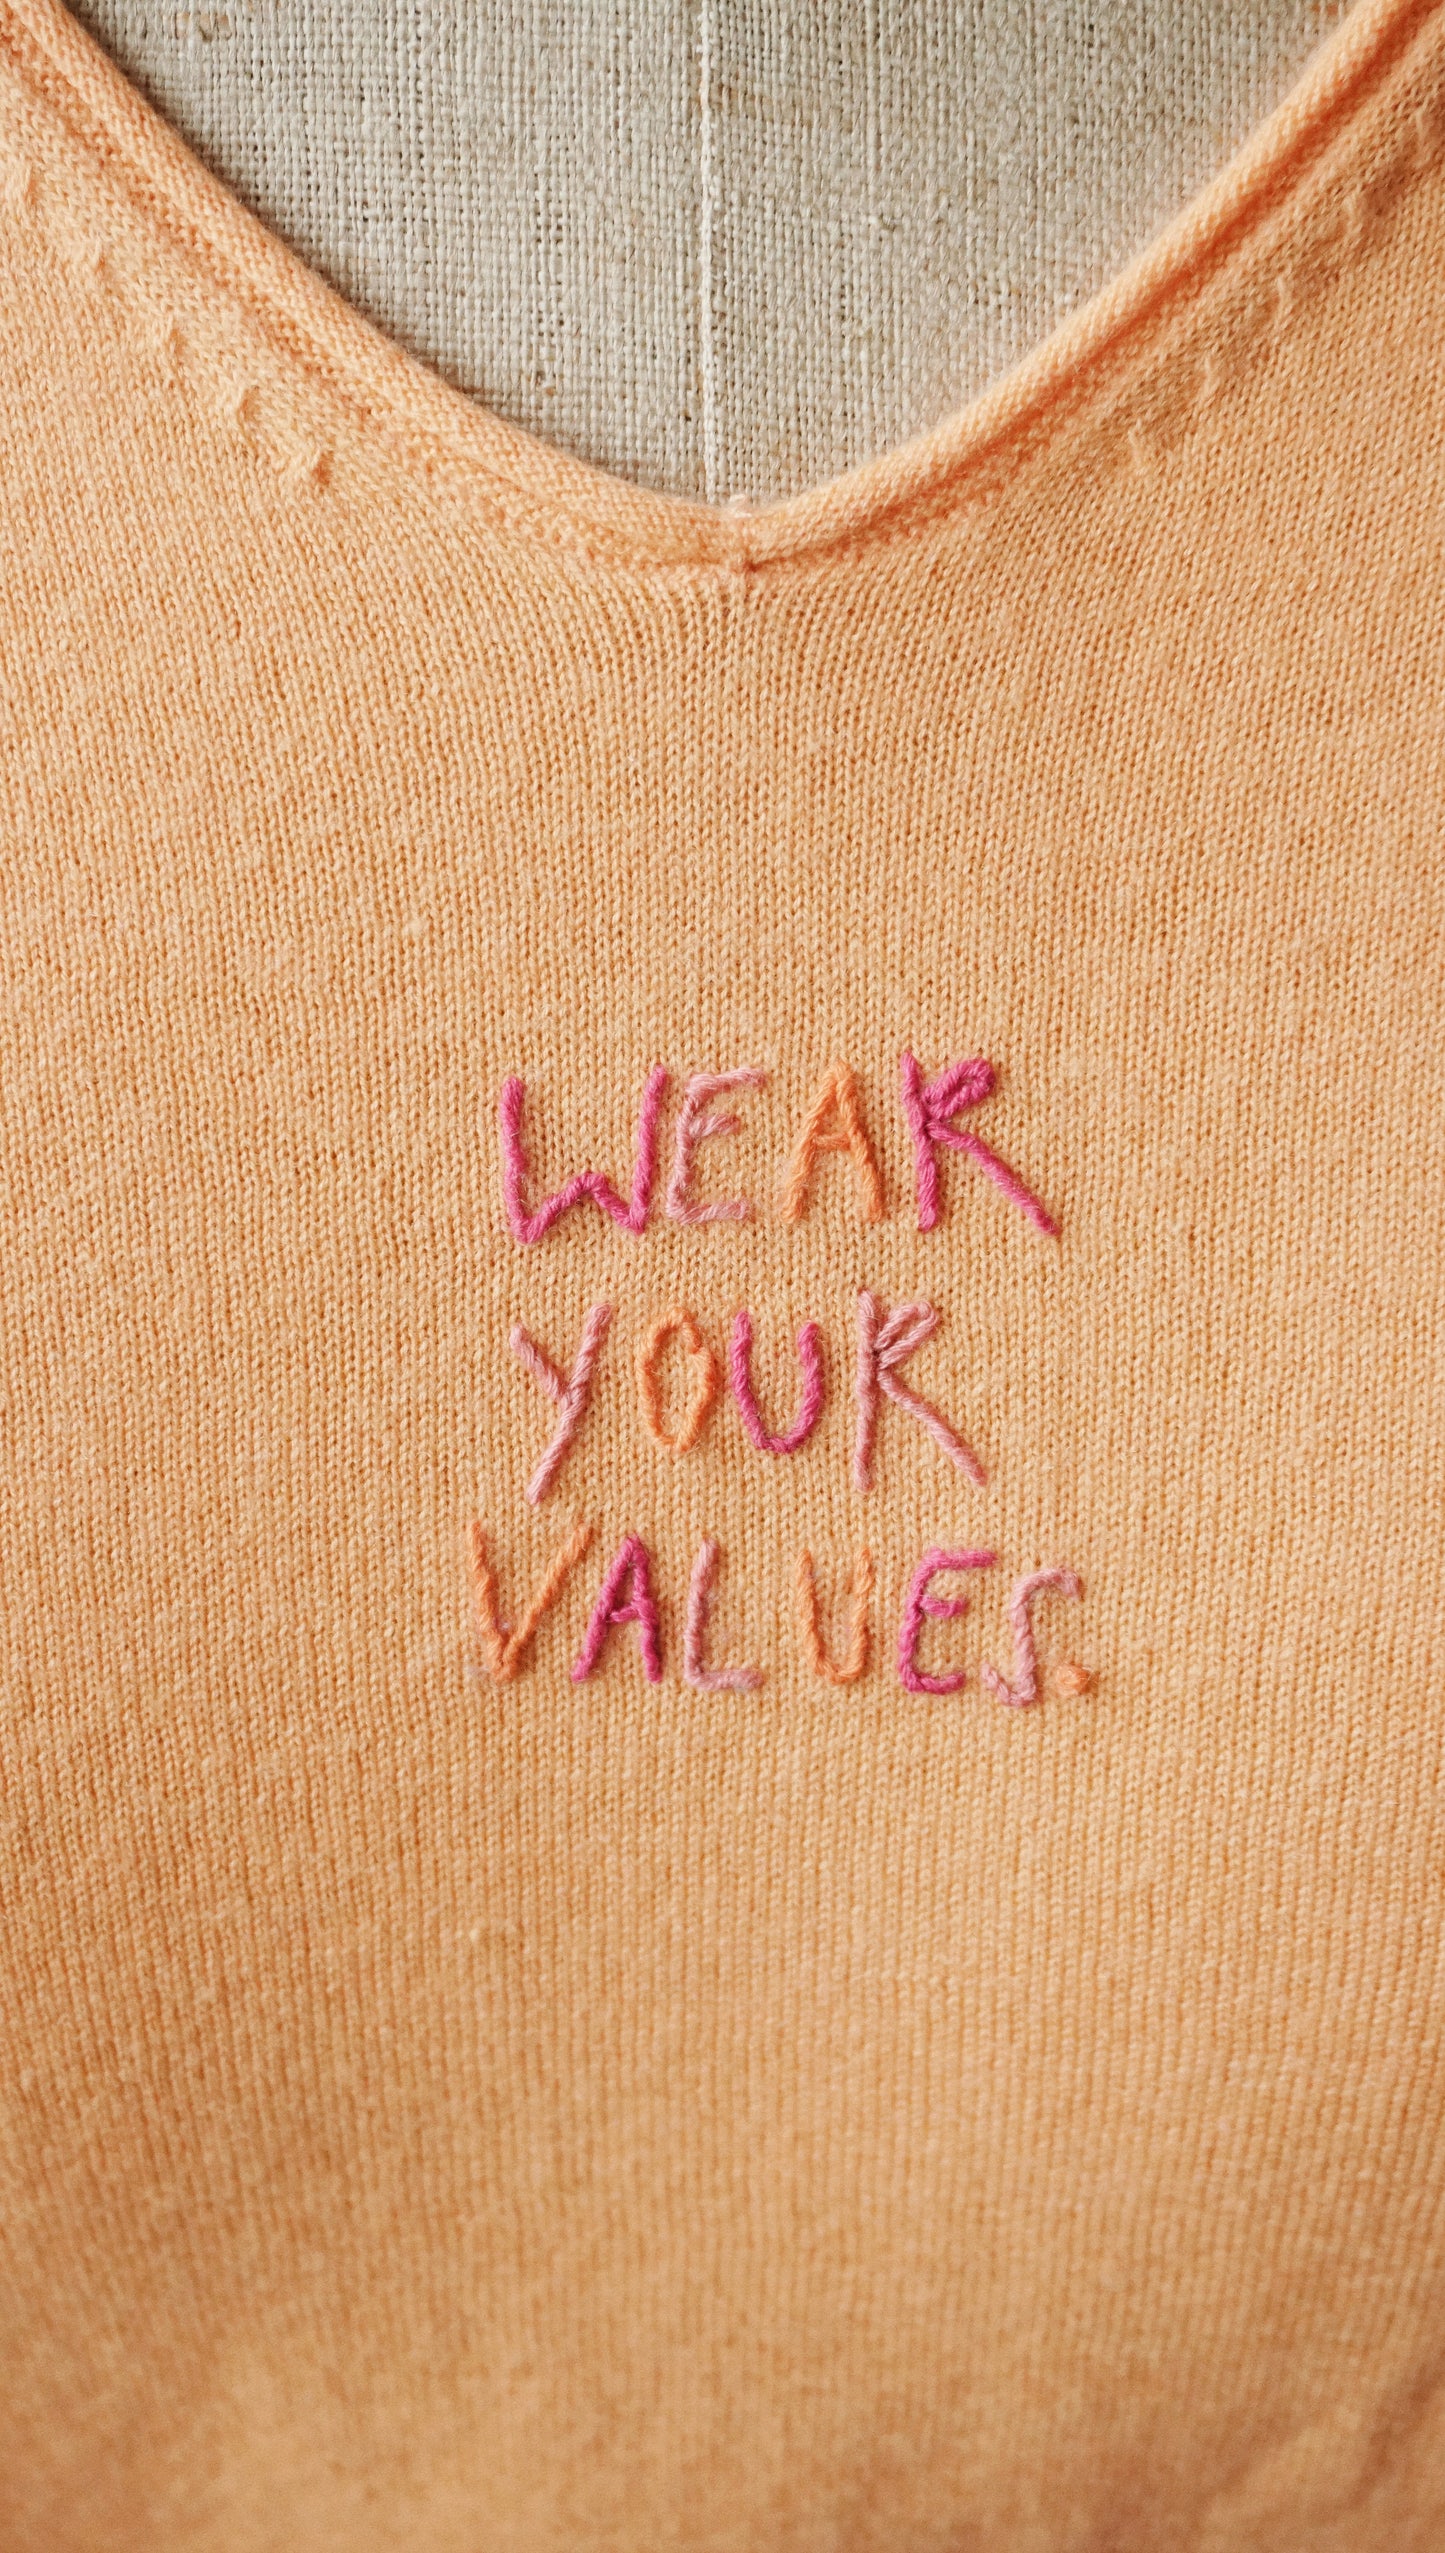 WEAR YOUR VALUES